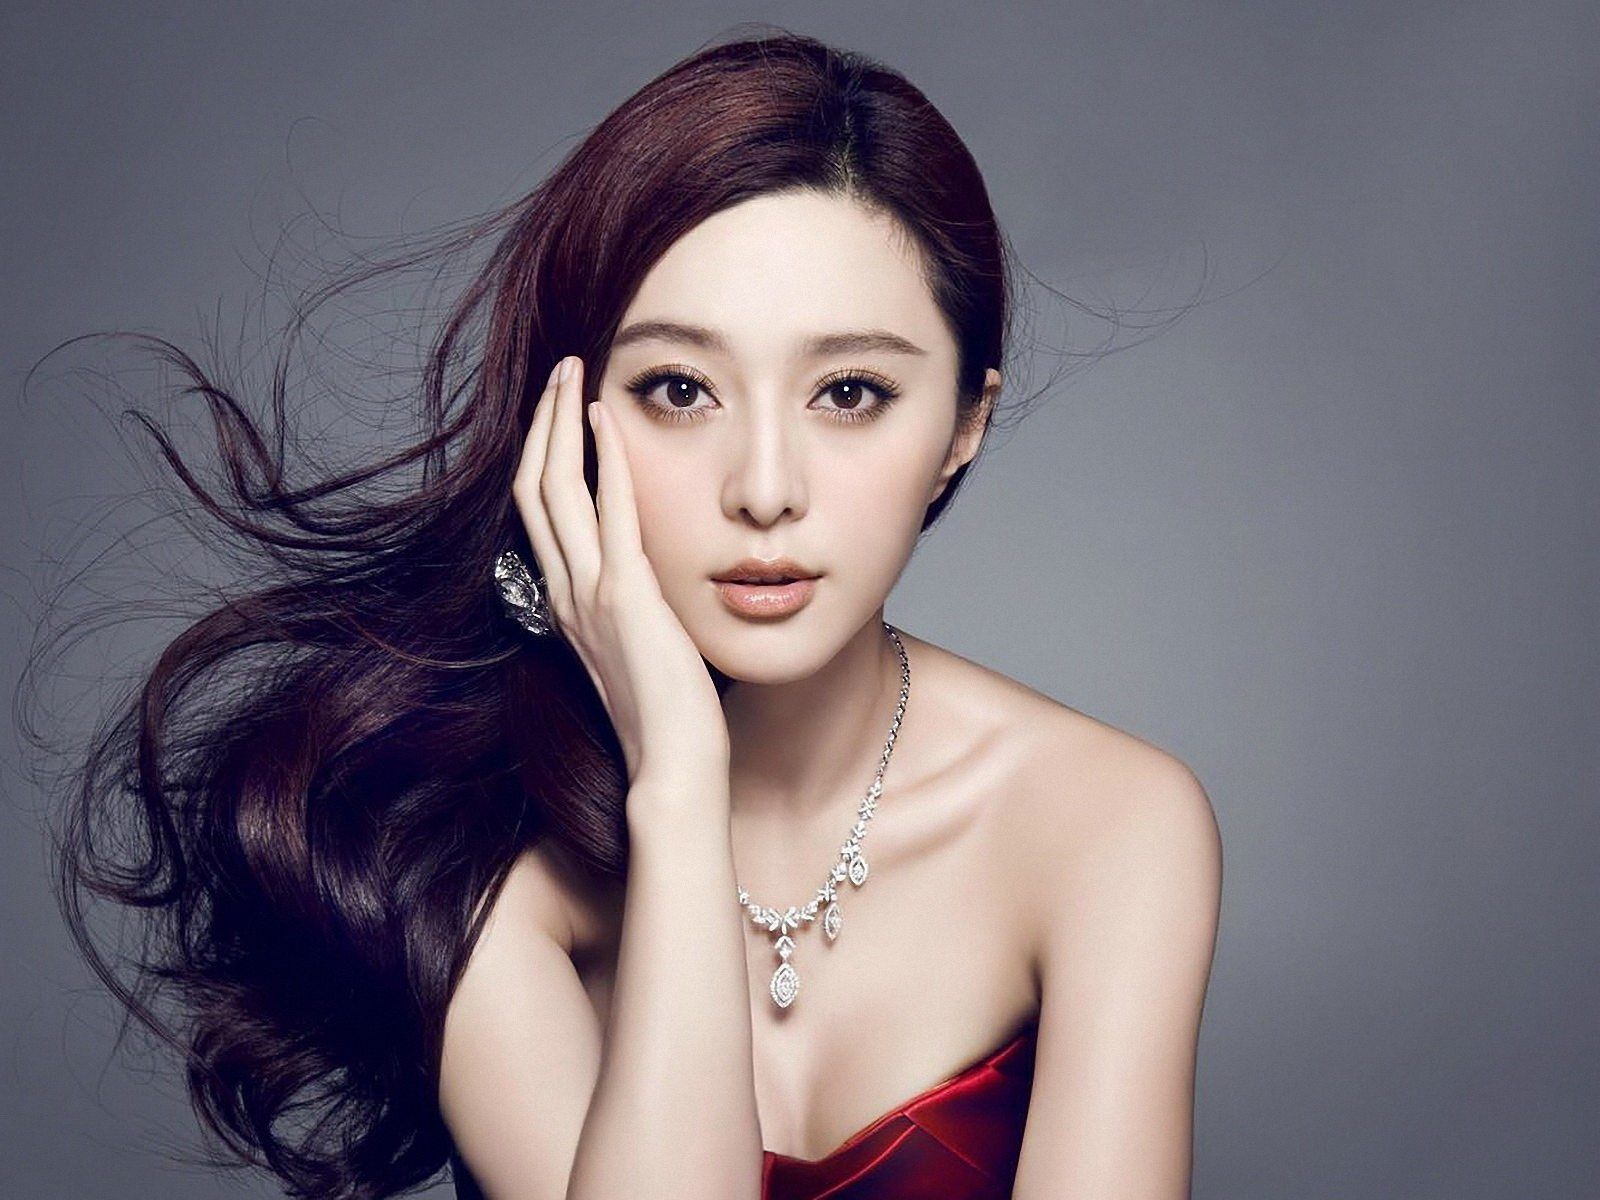 Fan Bingbing was on the top of China's entertainment industry before her tax evasion scandal. But can she find her way back to the top?